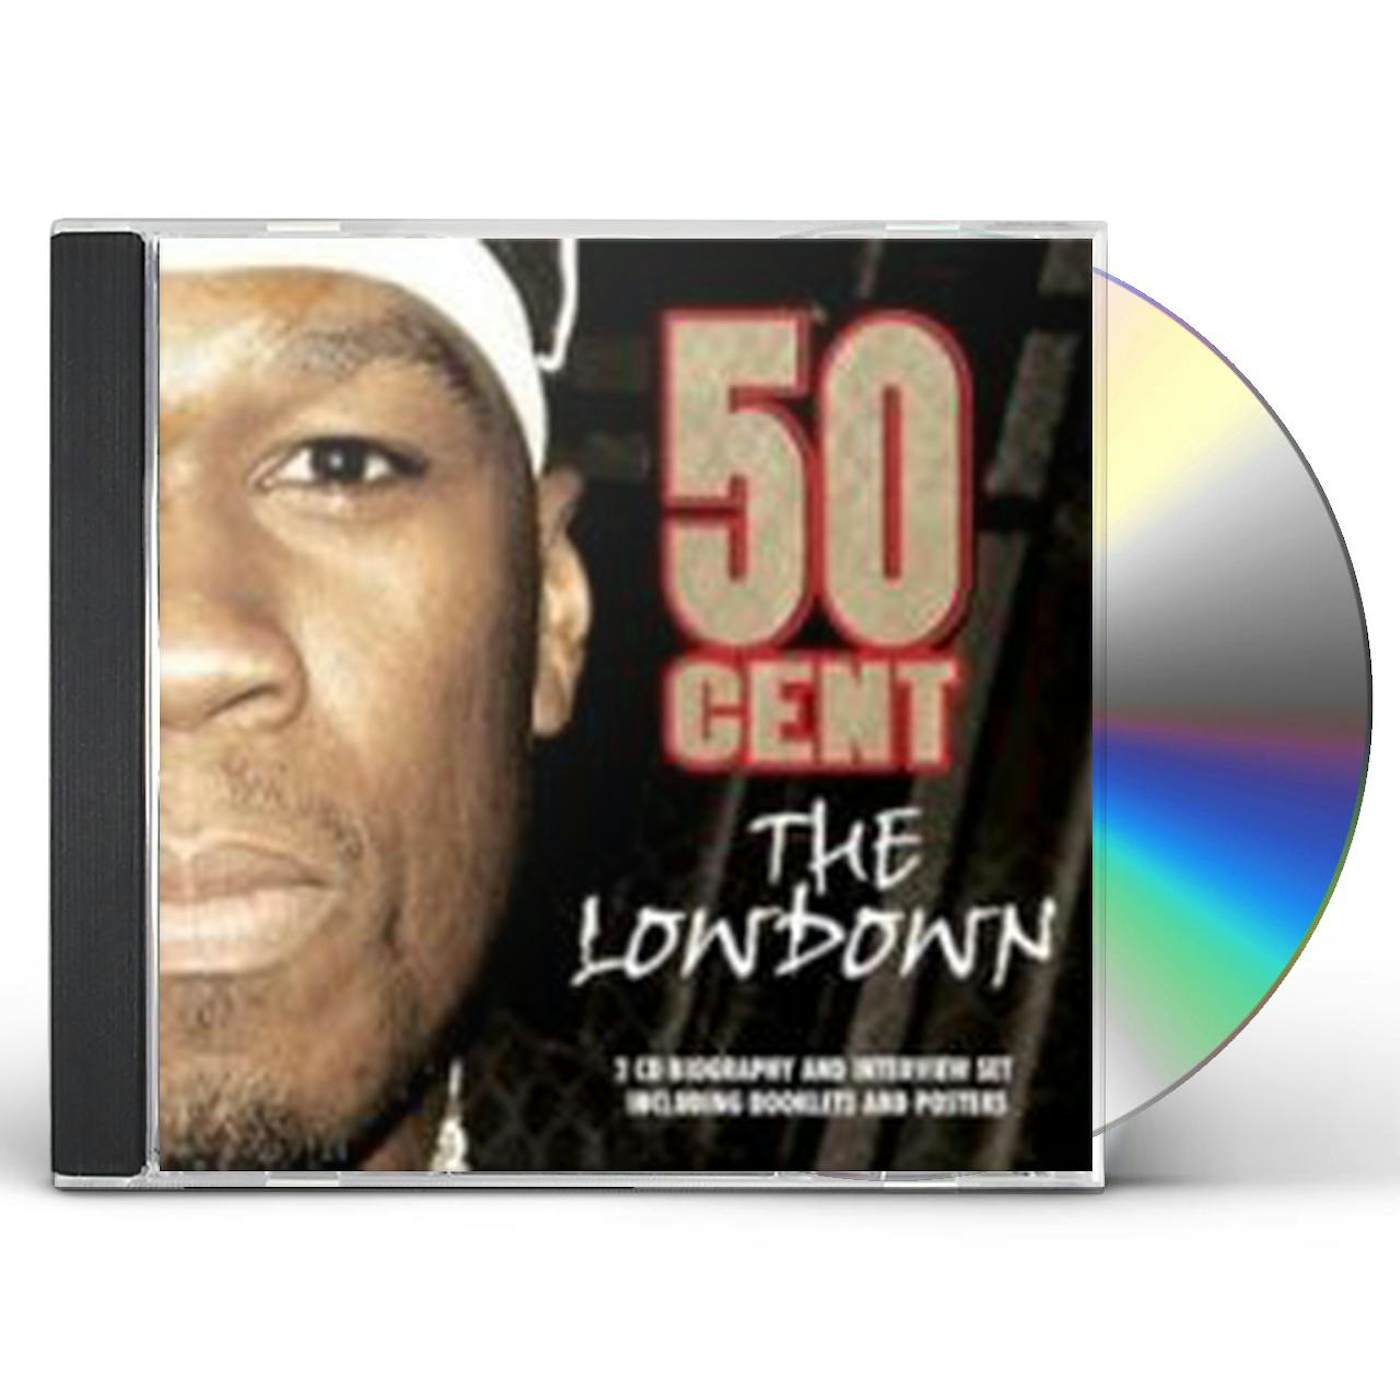 50 Cent Gifts & Merchandise for Sale